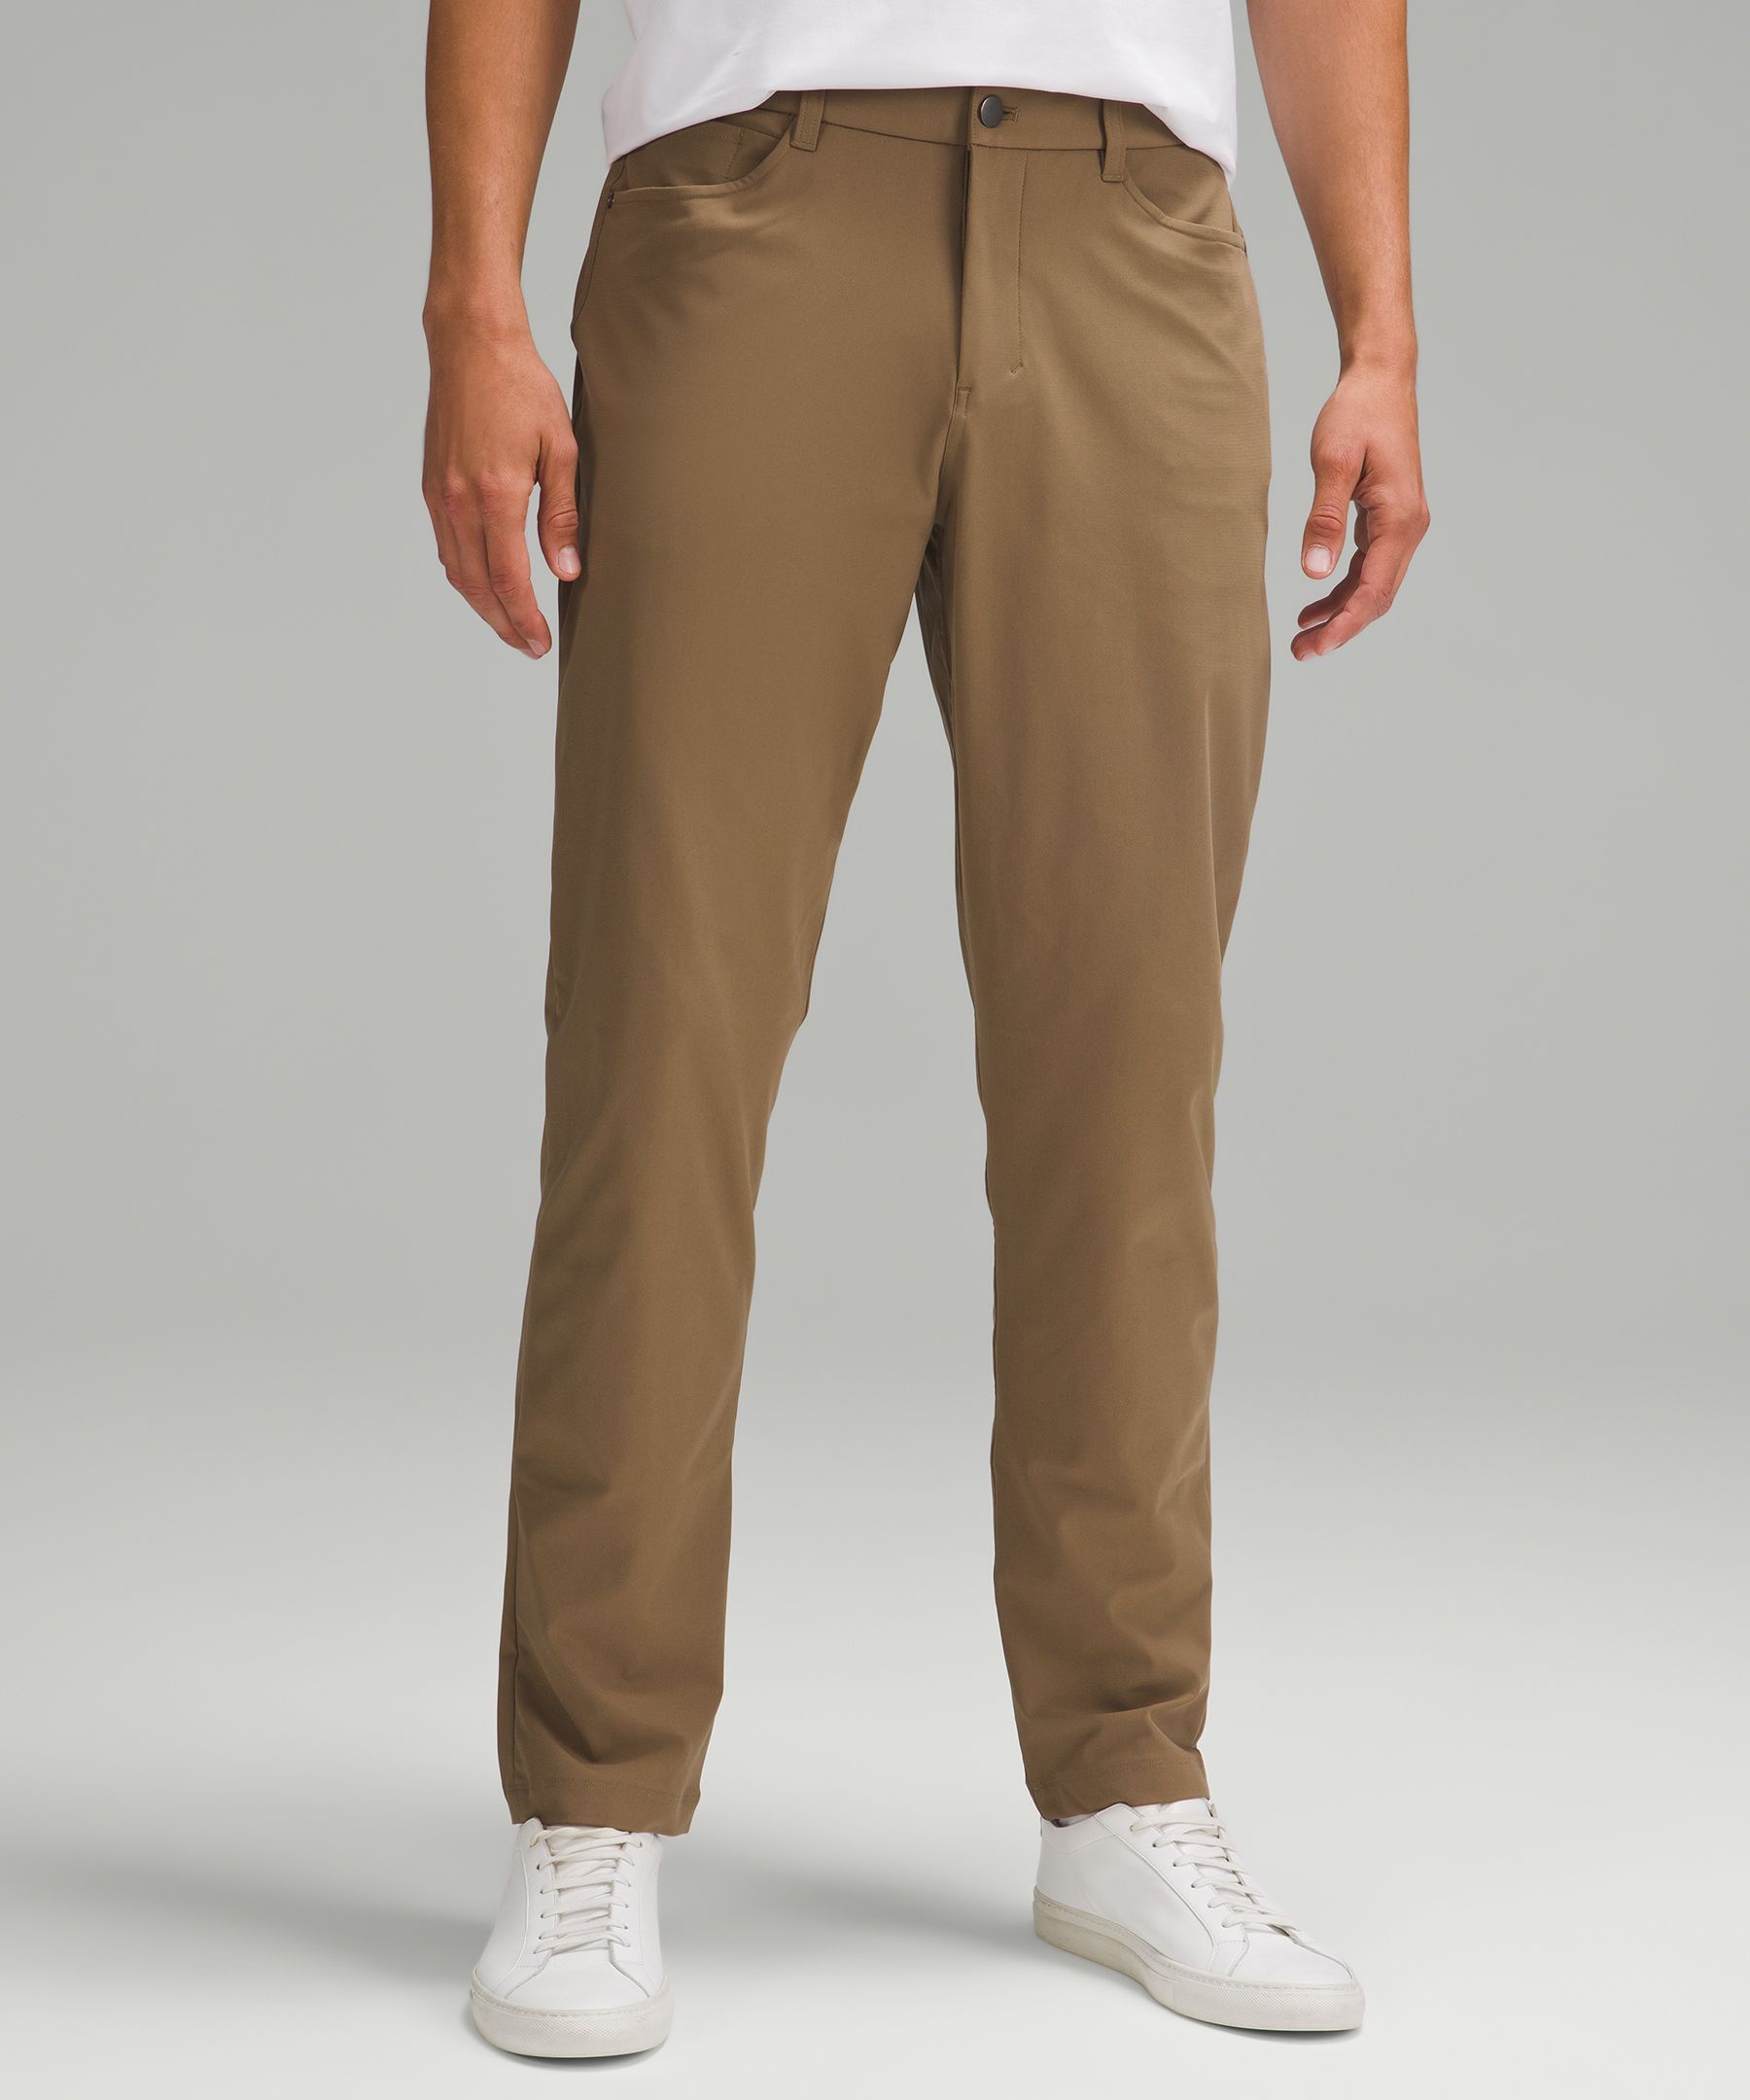 Brown Trousers - Tapered Trousers - Office Chic Trousers - Lulus